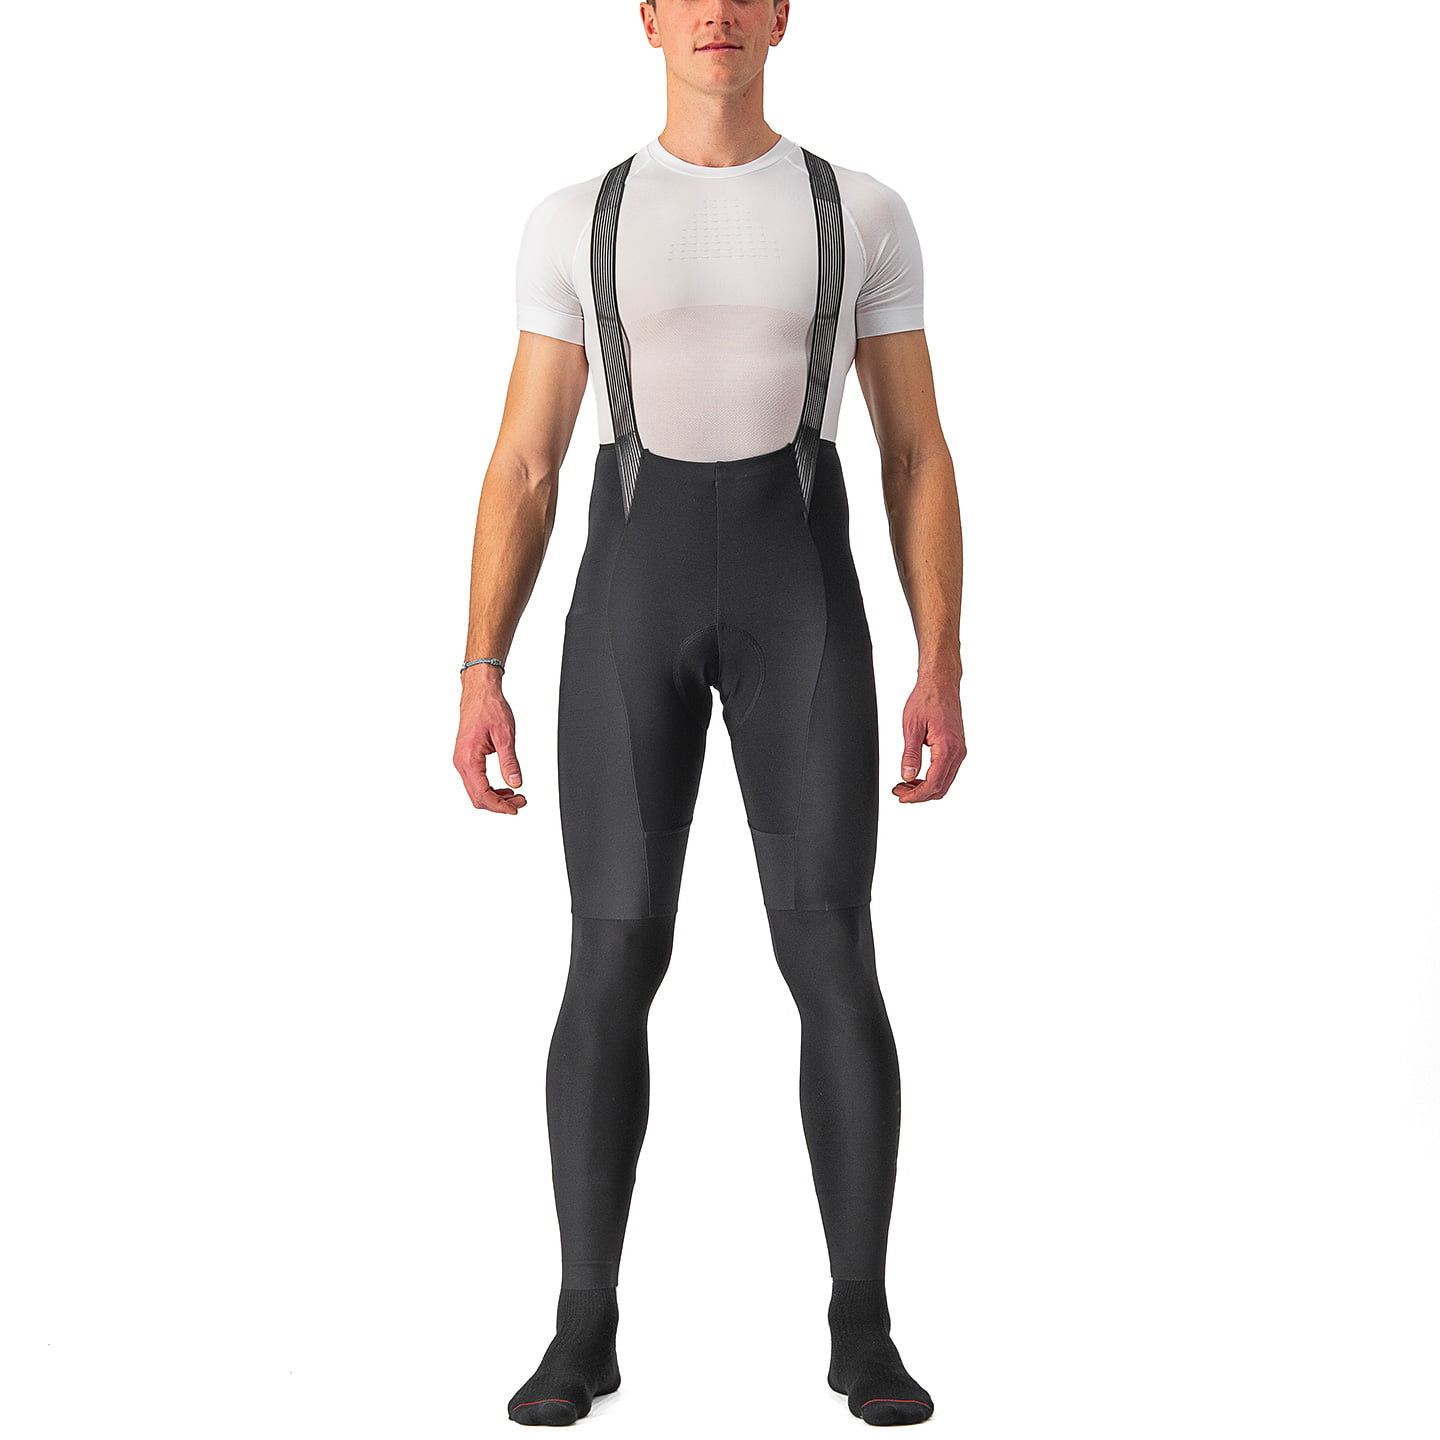 CASTELLI Free Aero RC Bib Tights Bib Tights, for men, size S, Cycle trousers, Cycle clothing